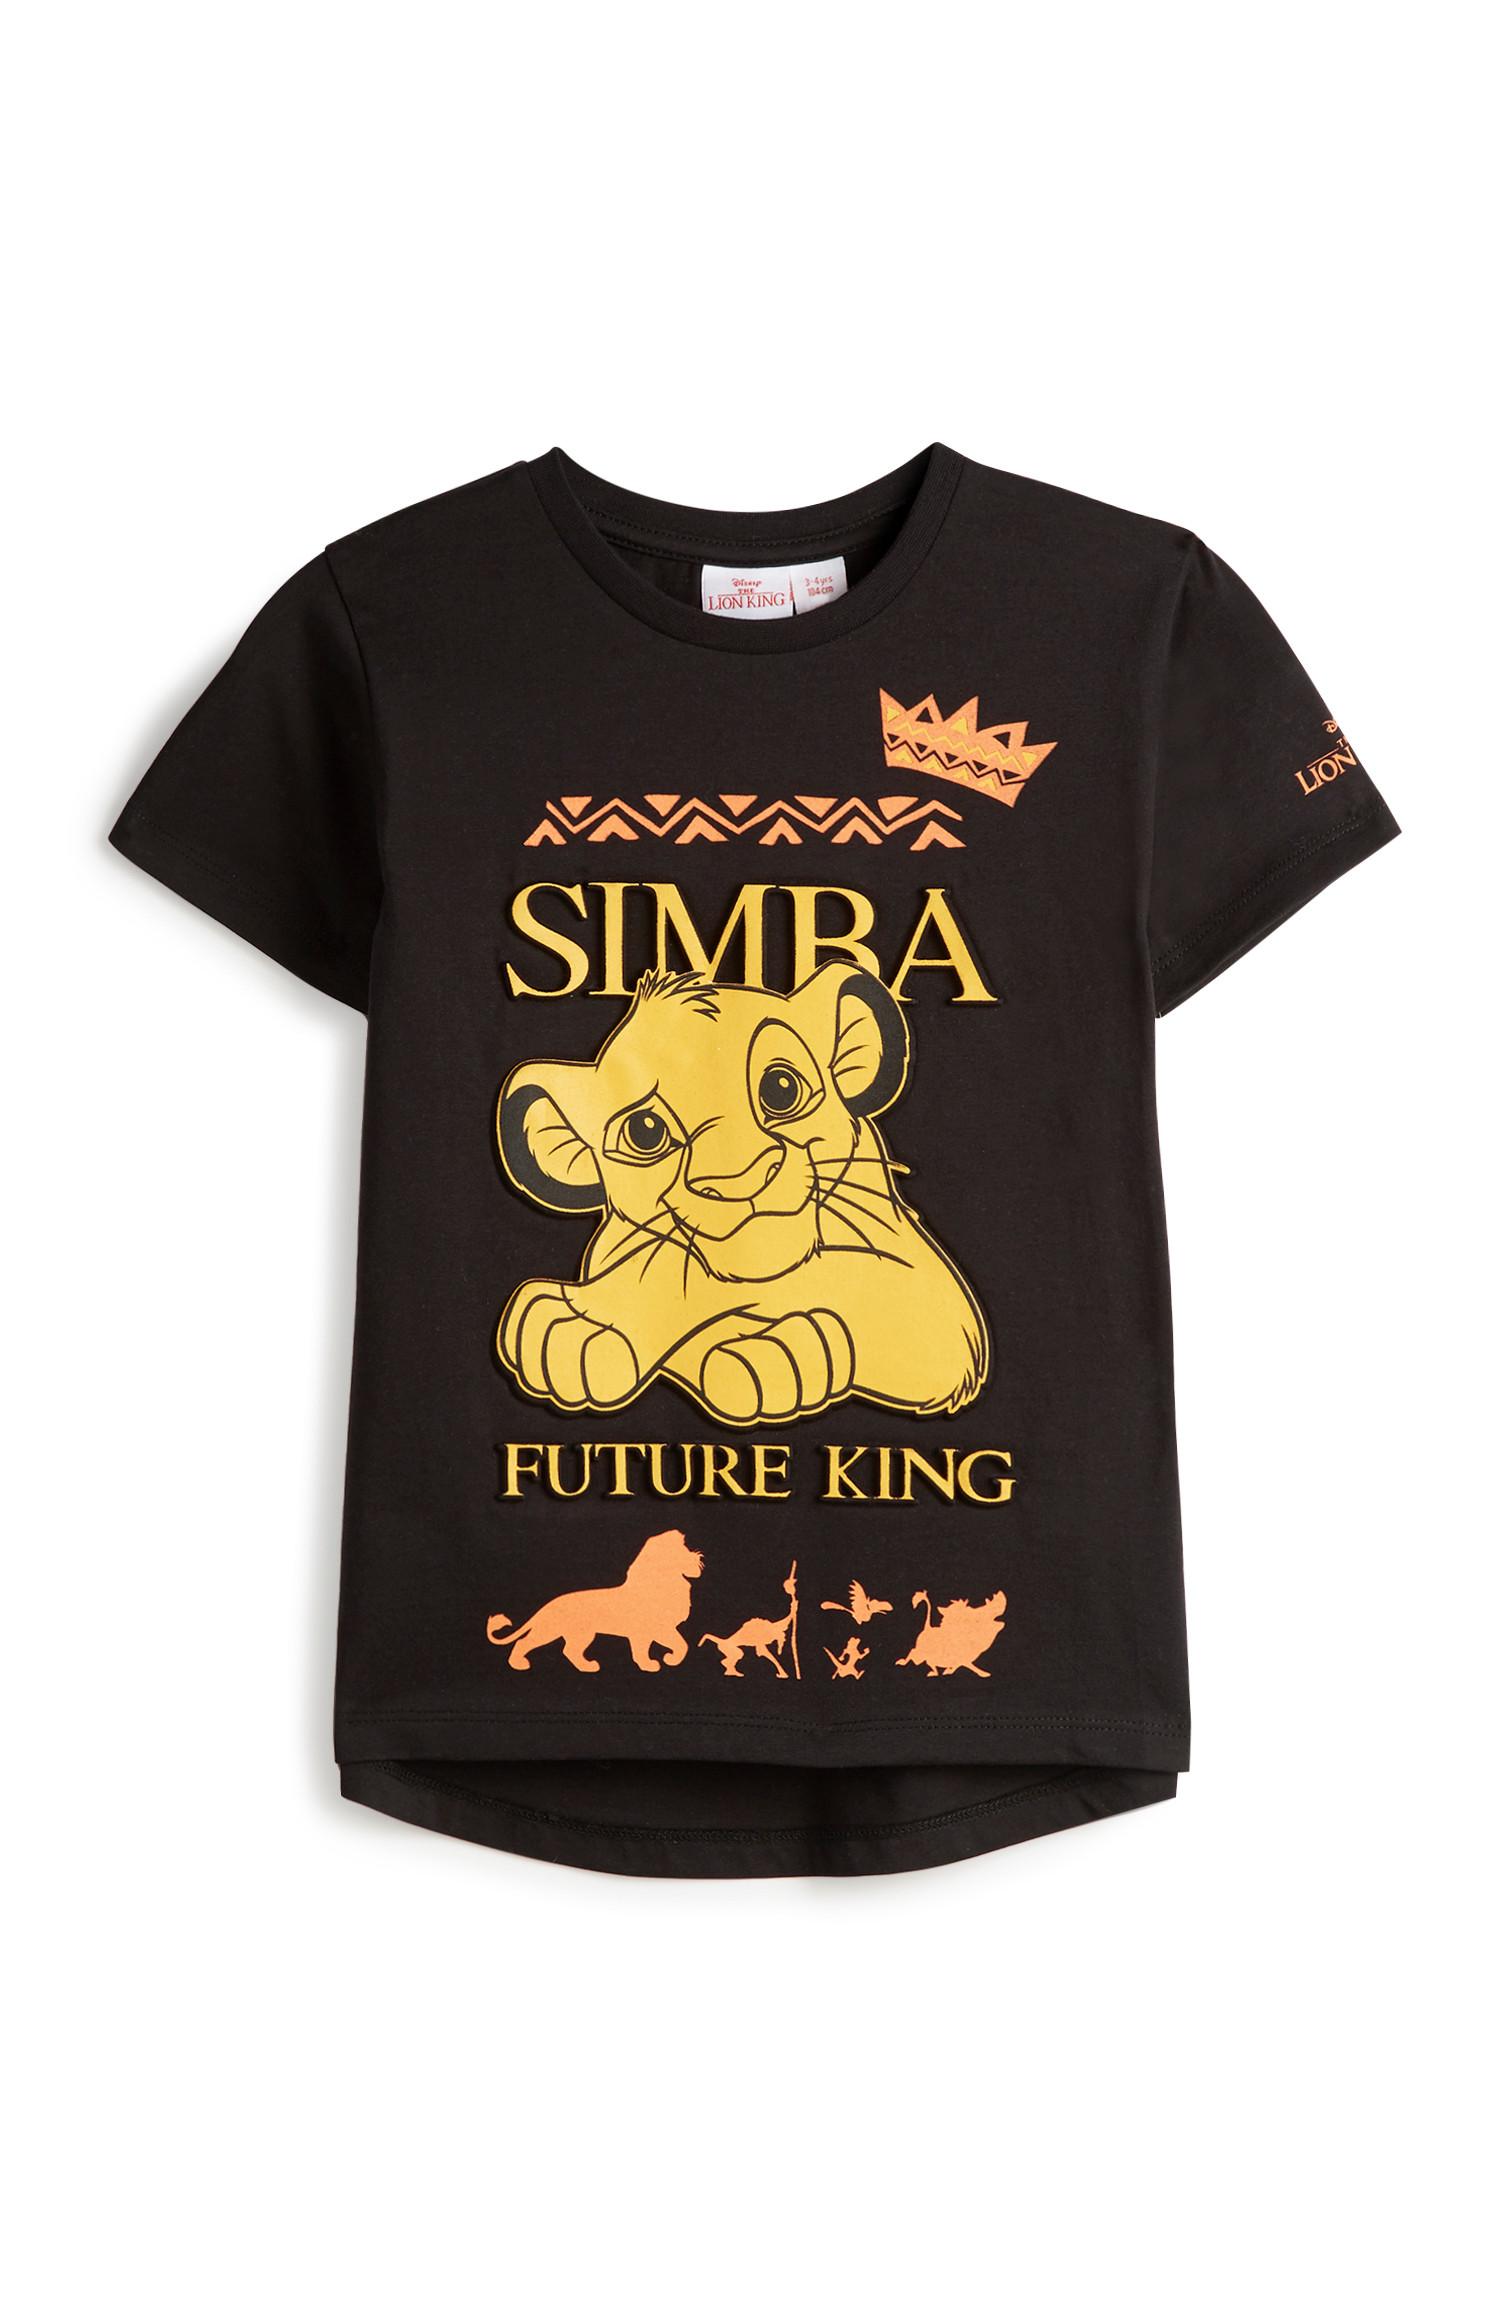 lion king baby clothes primark